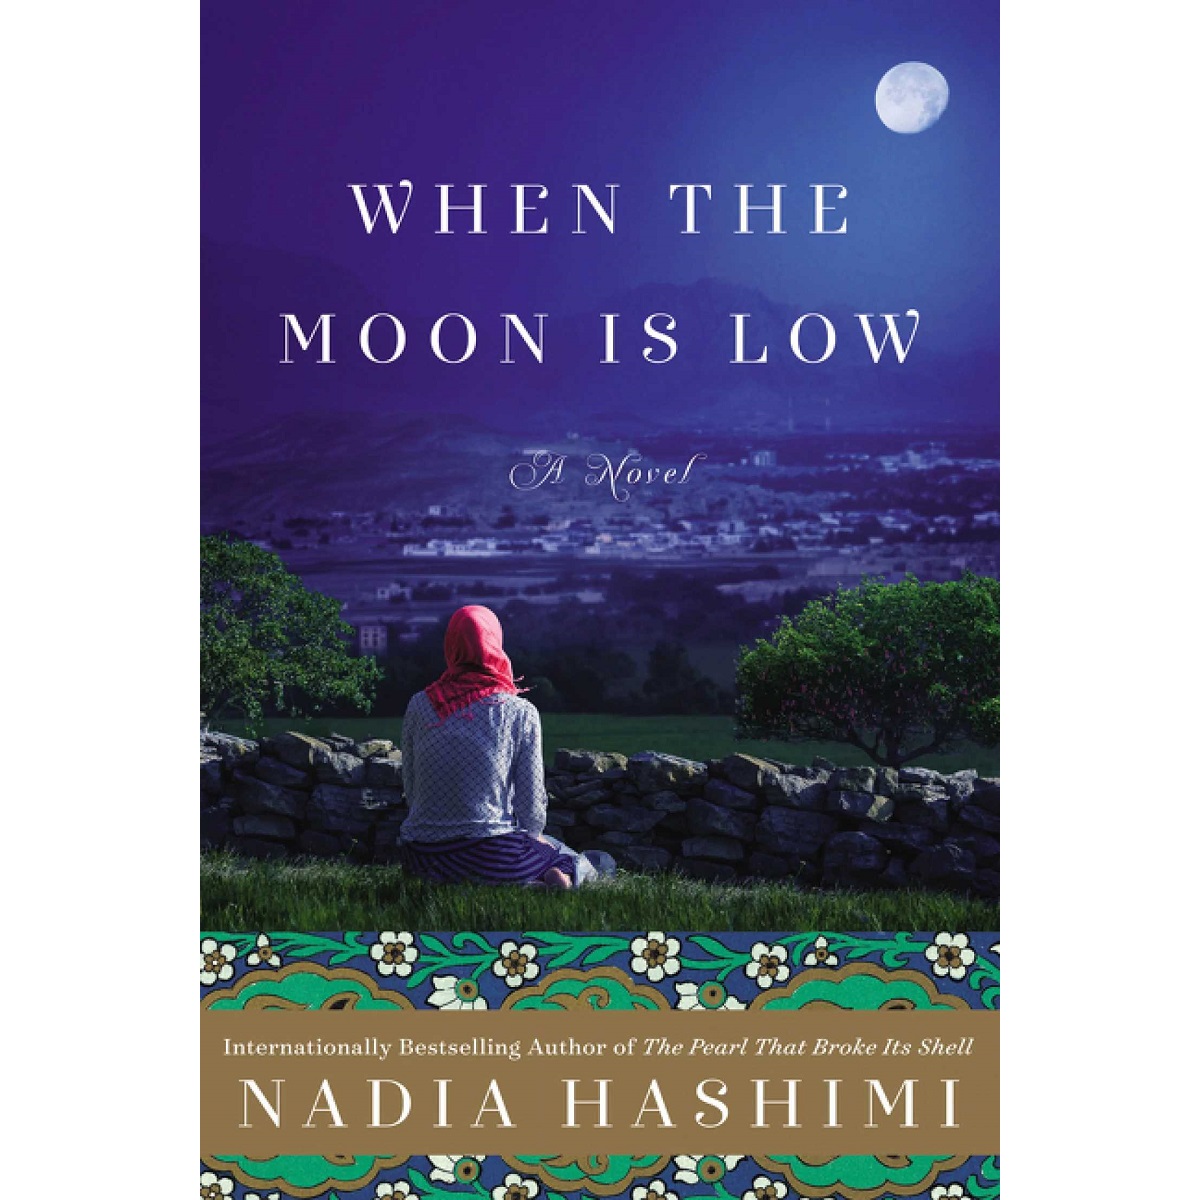 When the Moon Is Low By Nadia Hashimi (Hardcover)